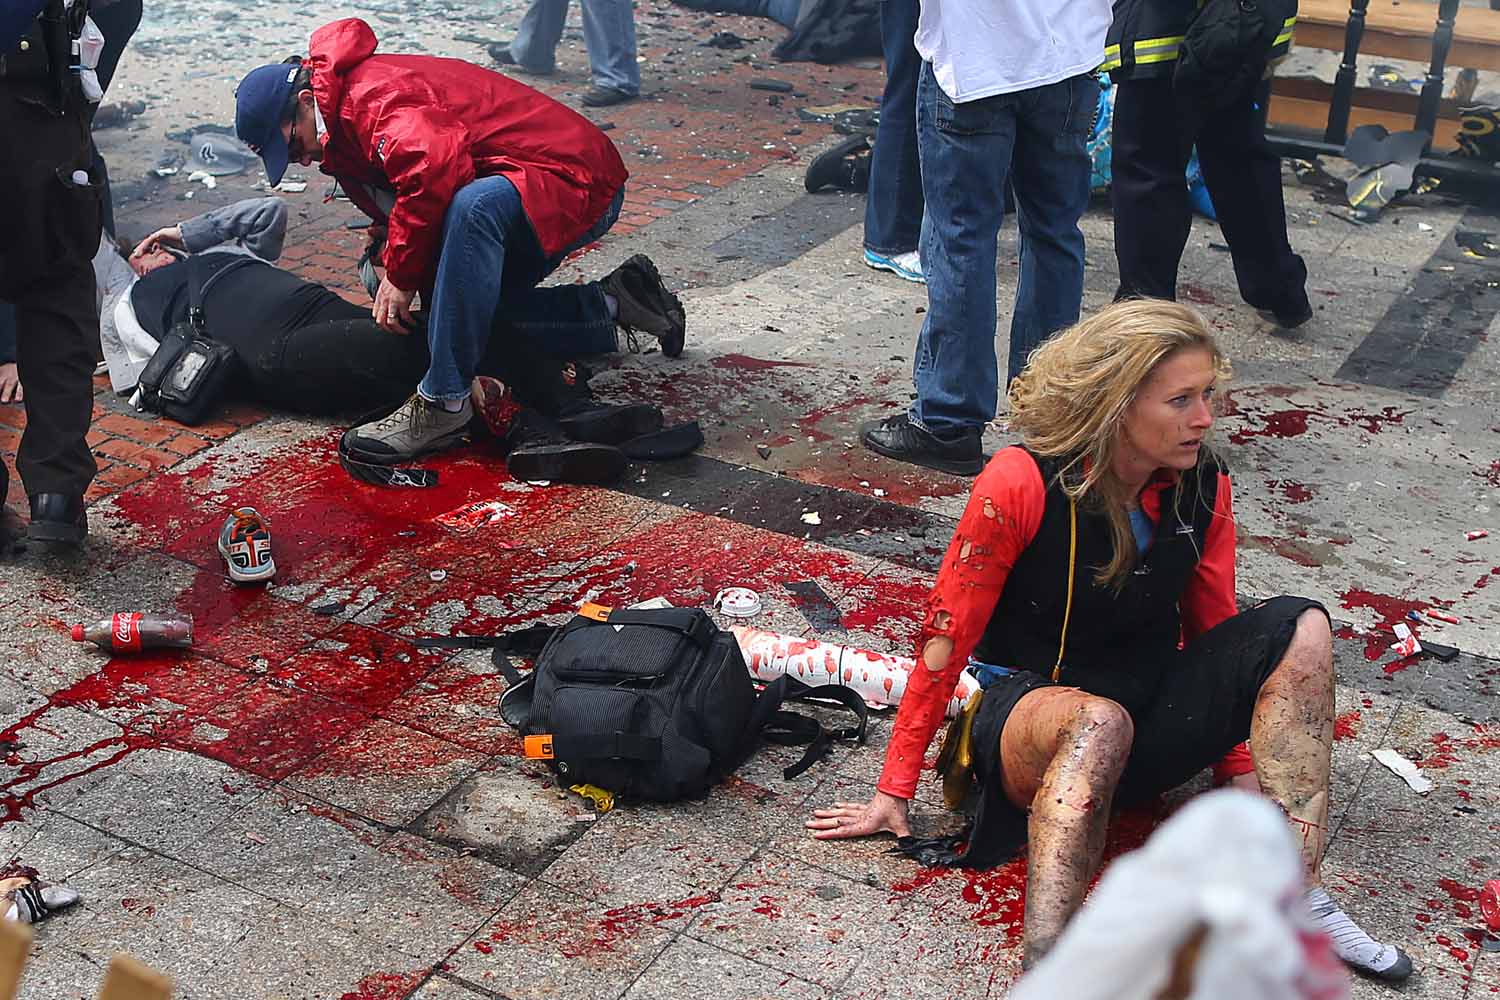 April 15, 2013. Victims are in shock and being treated at the scene of the first explosion that went off near the finish line of the Boston Marathon.